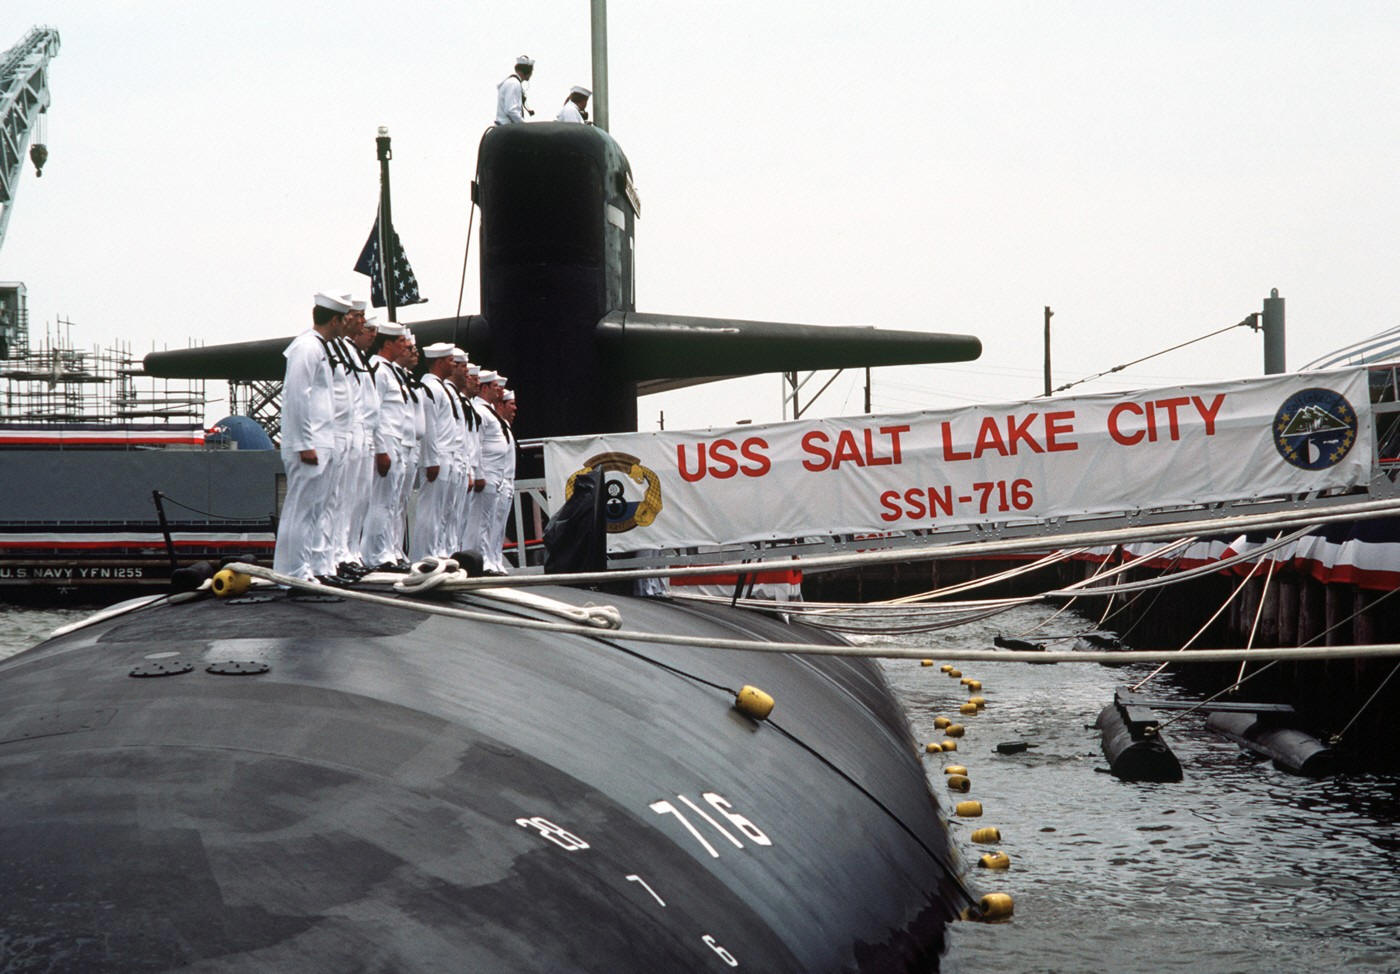 ssn-716 uss salt lake city commissioning ceremony may 1984